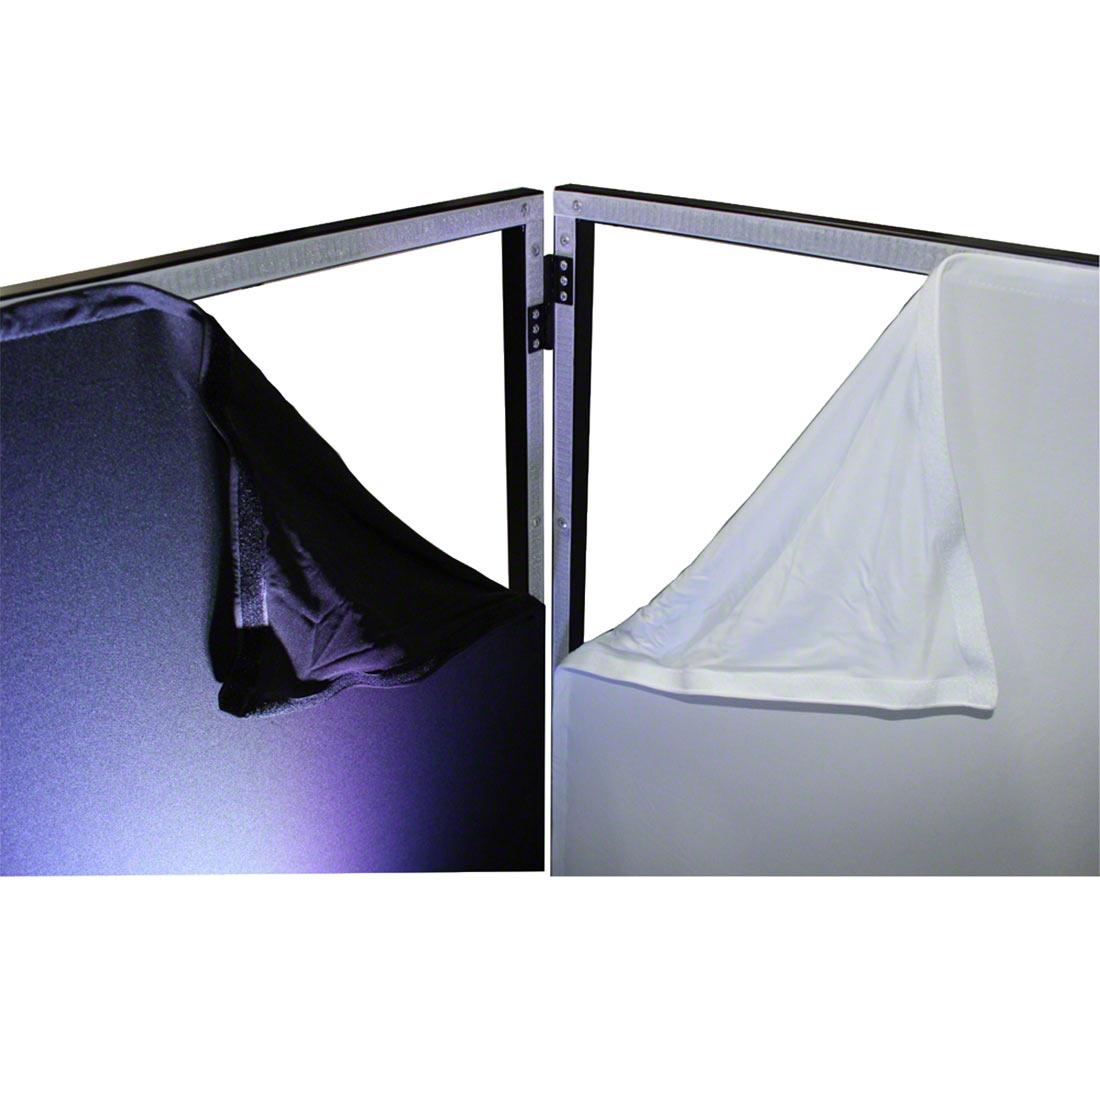 PRORECK DJ Foldable Facade Portable Event Booth Panels 4 Detachable Black  Metal Frame Projector Display Scrim Panel with Carry Bag (black and white)  : : Musical Instruments